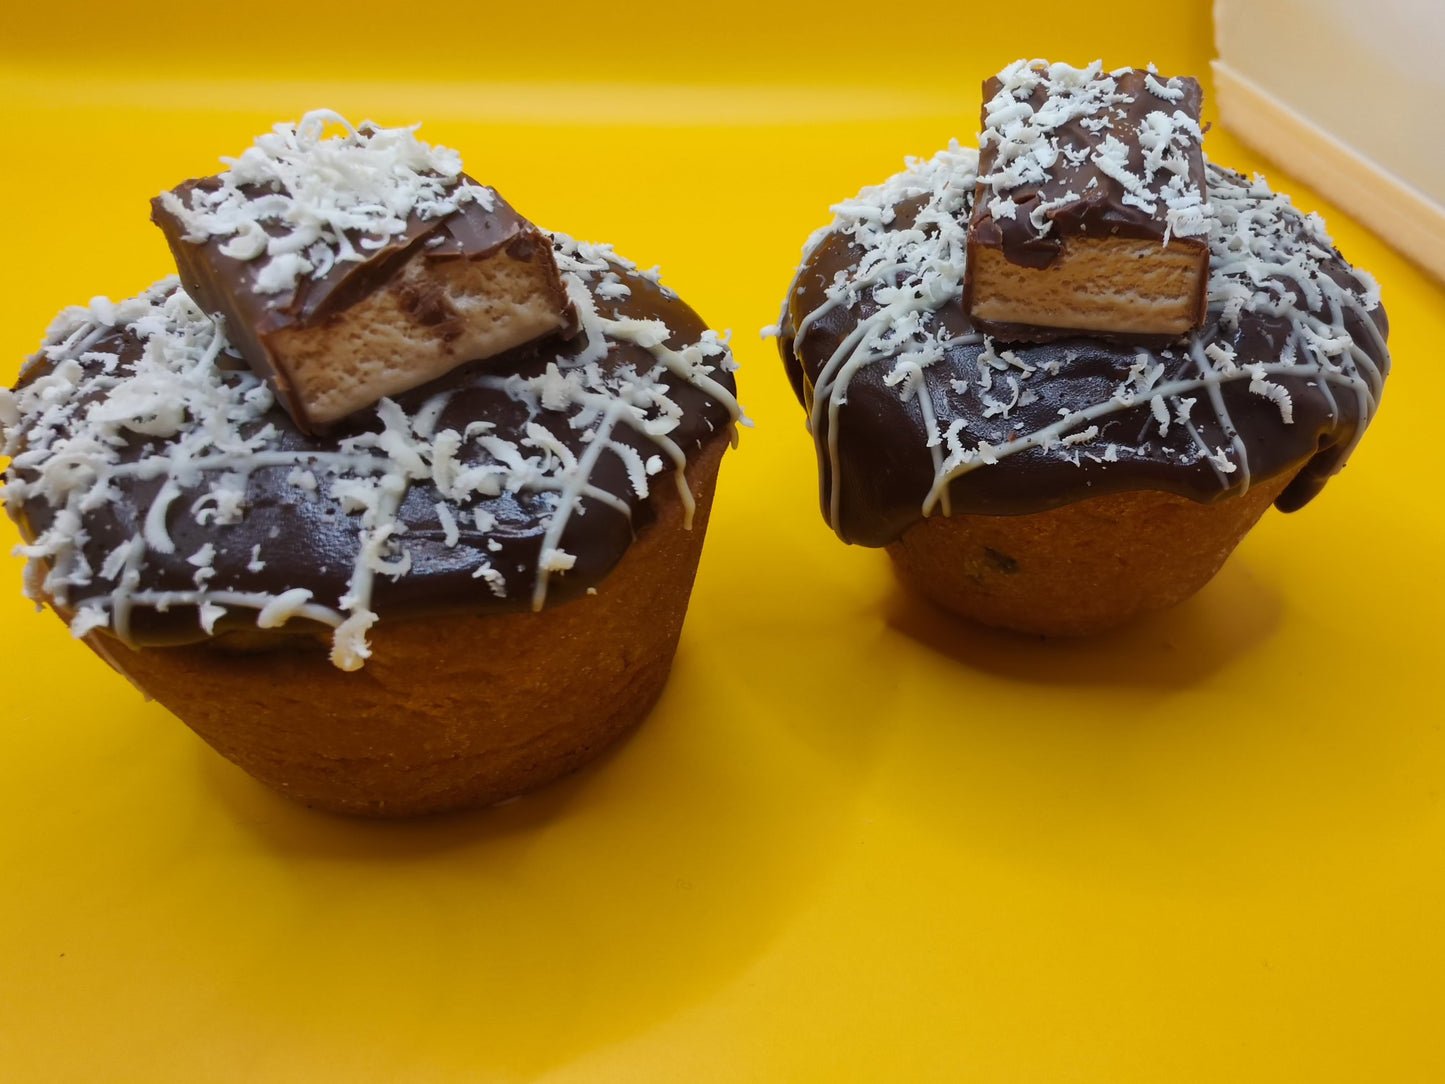 Our our original choc chip dough stuffed cookie with milky way and white chocolate, choc stars and topped with chocolate ganache, milky way with white chocolate shavings and stripes !